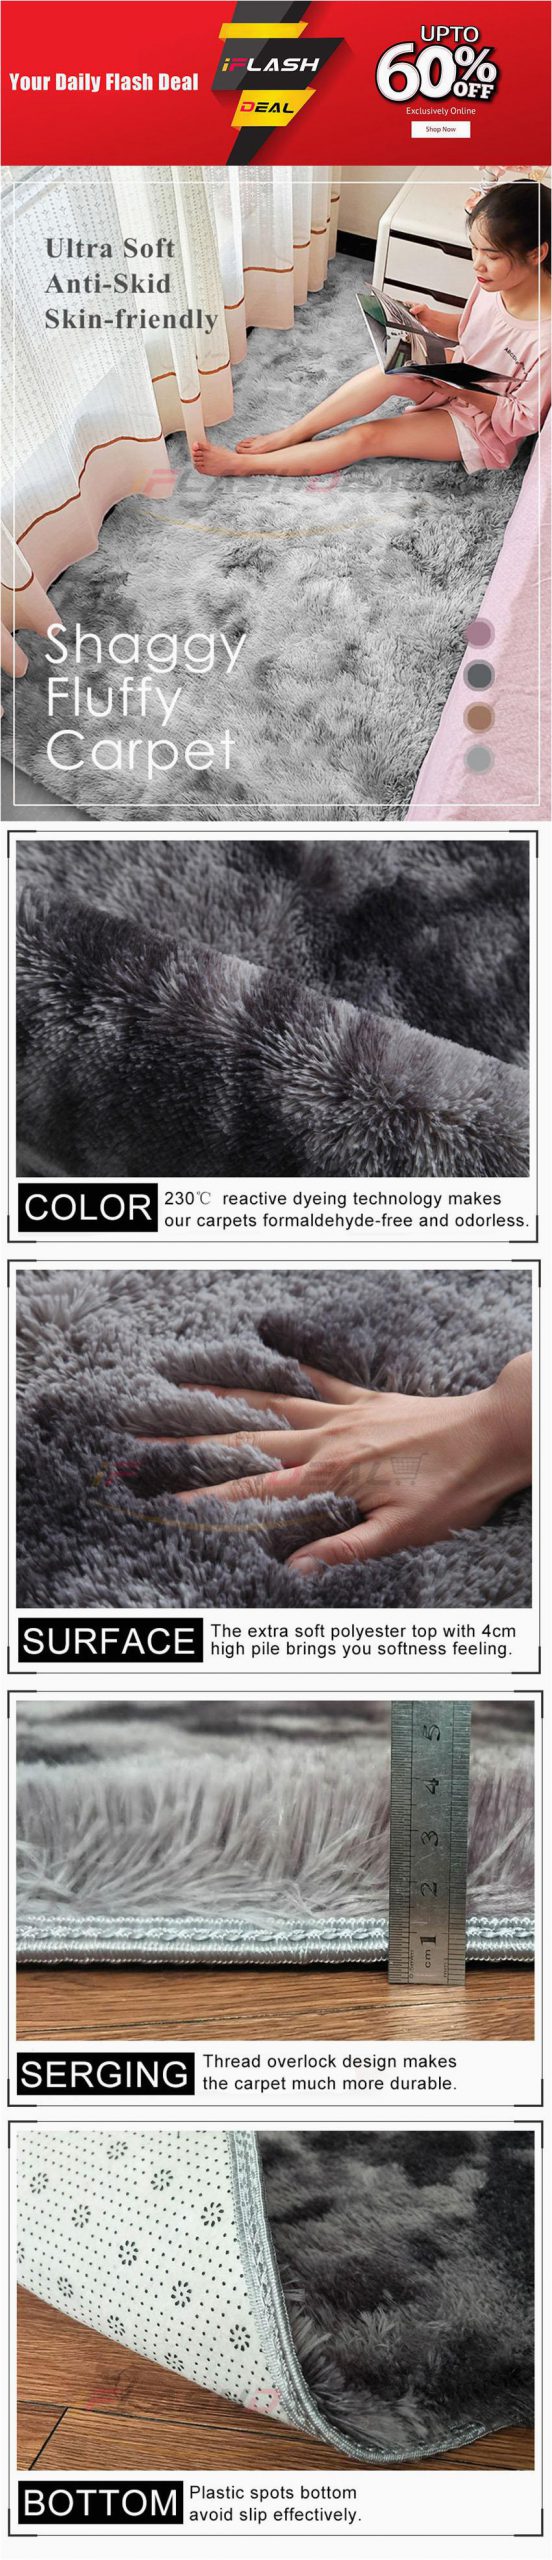 Large Non Slip area Rugs iflashdeal soft Carpet Fluffy Home Rug Fur area Rugs Anti Skid Floor Non Slip Carpet Floor Mat Polyester Carpets Grip Mat for Baby Playing